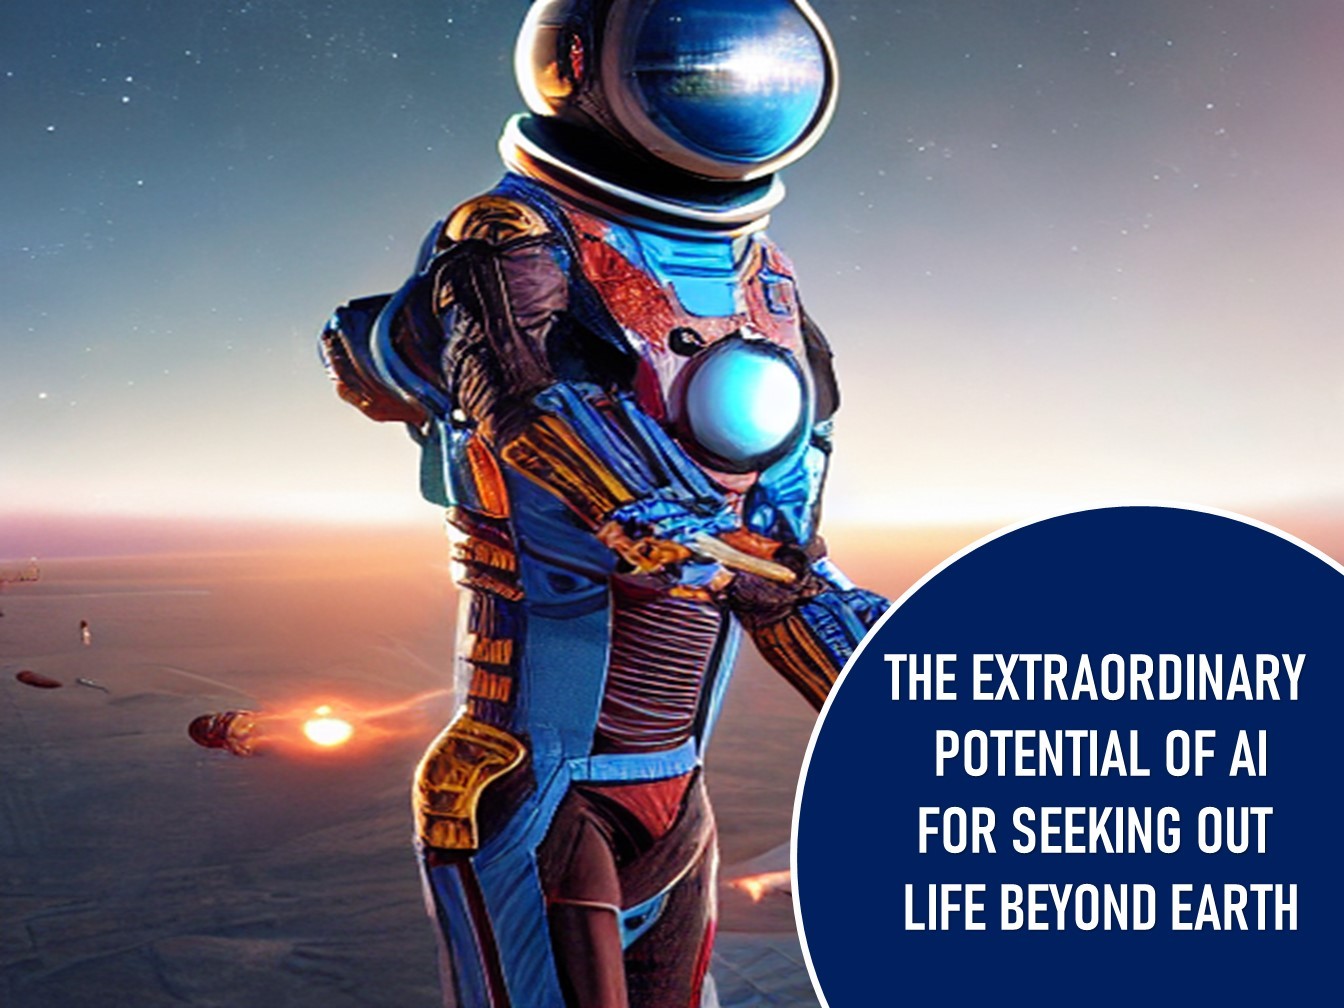 The Extraordinary Potential Of AI For Seeking Out Life Beyond Earth